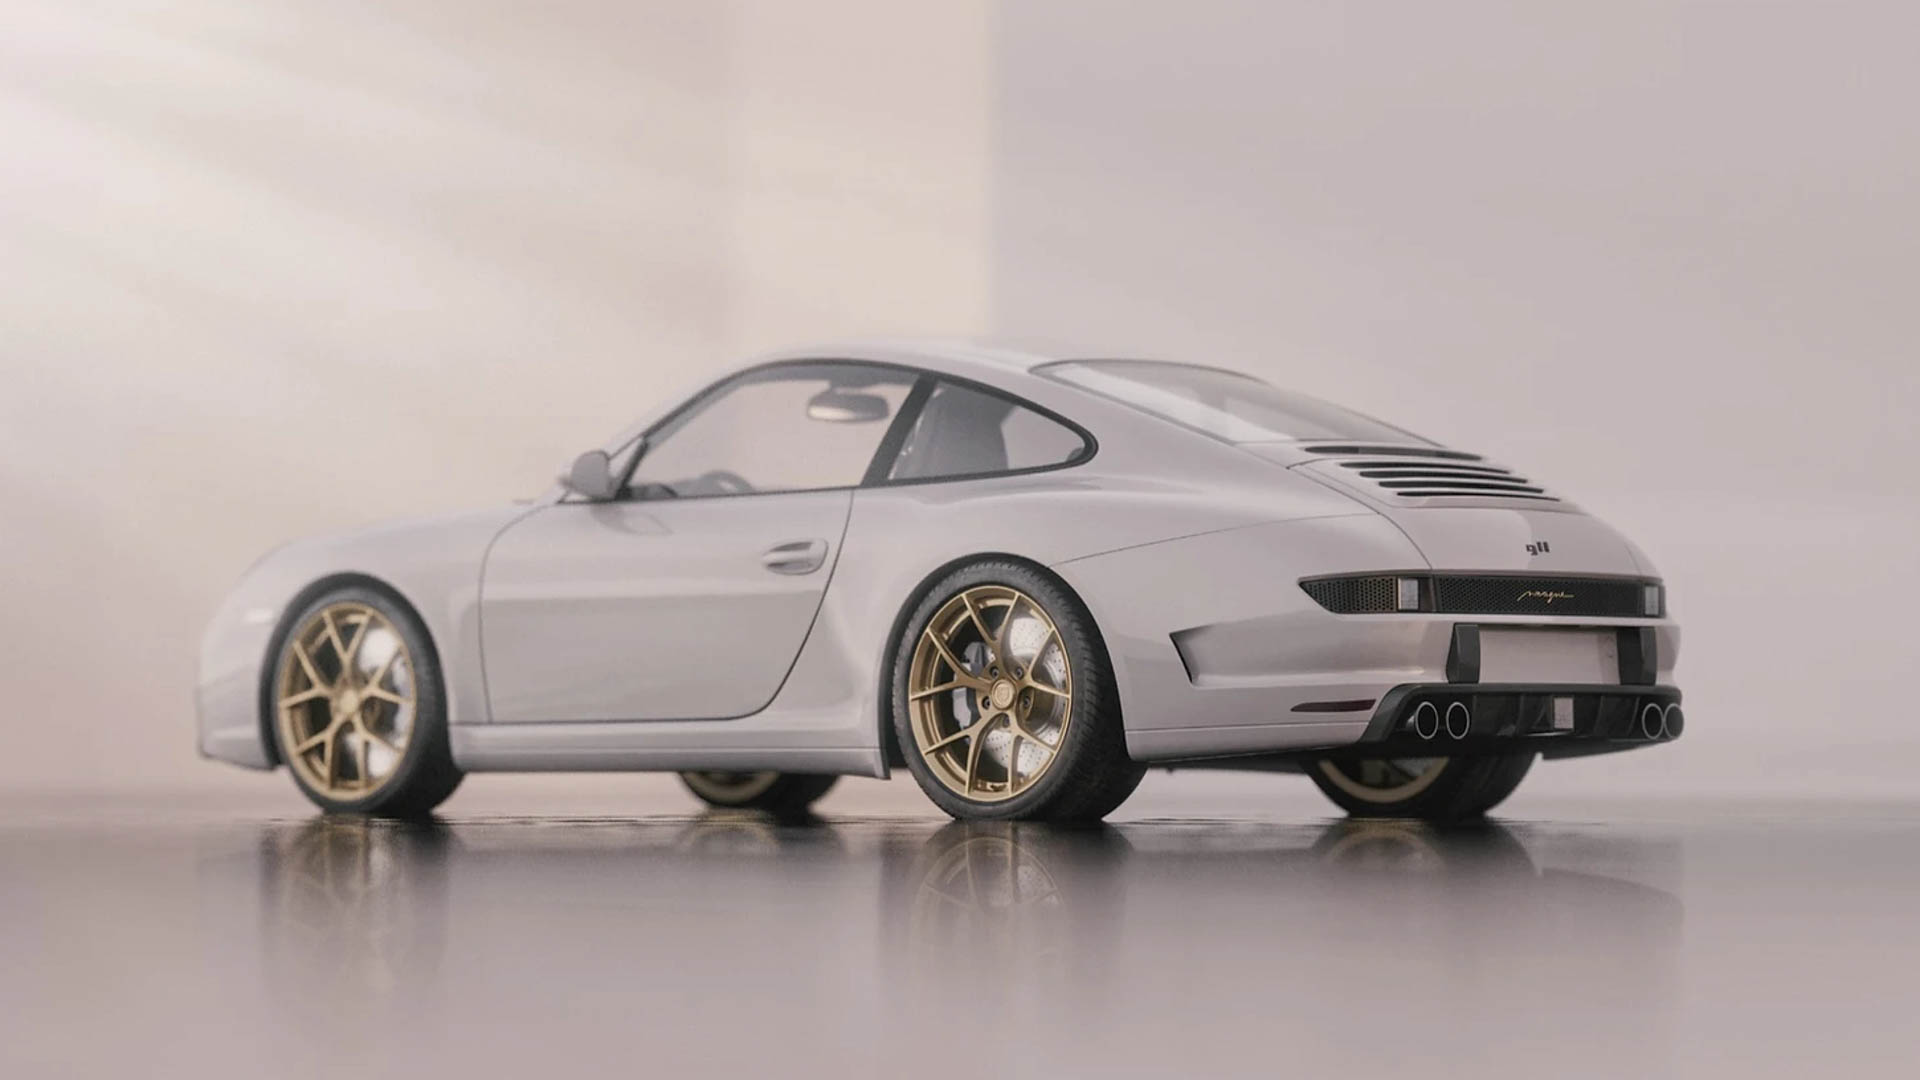 Odd-Looking Porsche 911 Remake Is the Singer We Have At Home